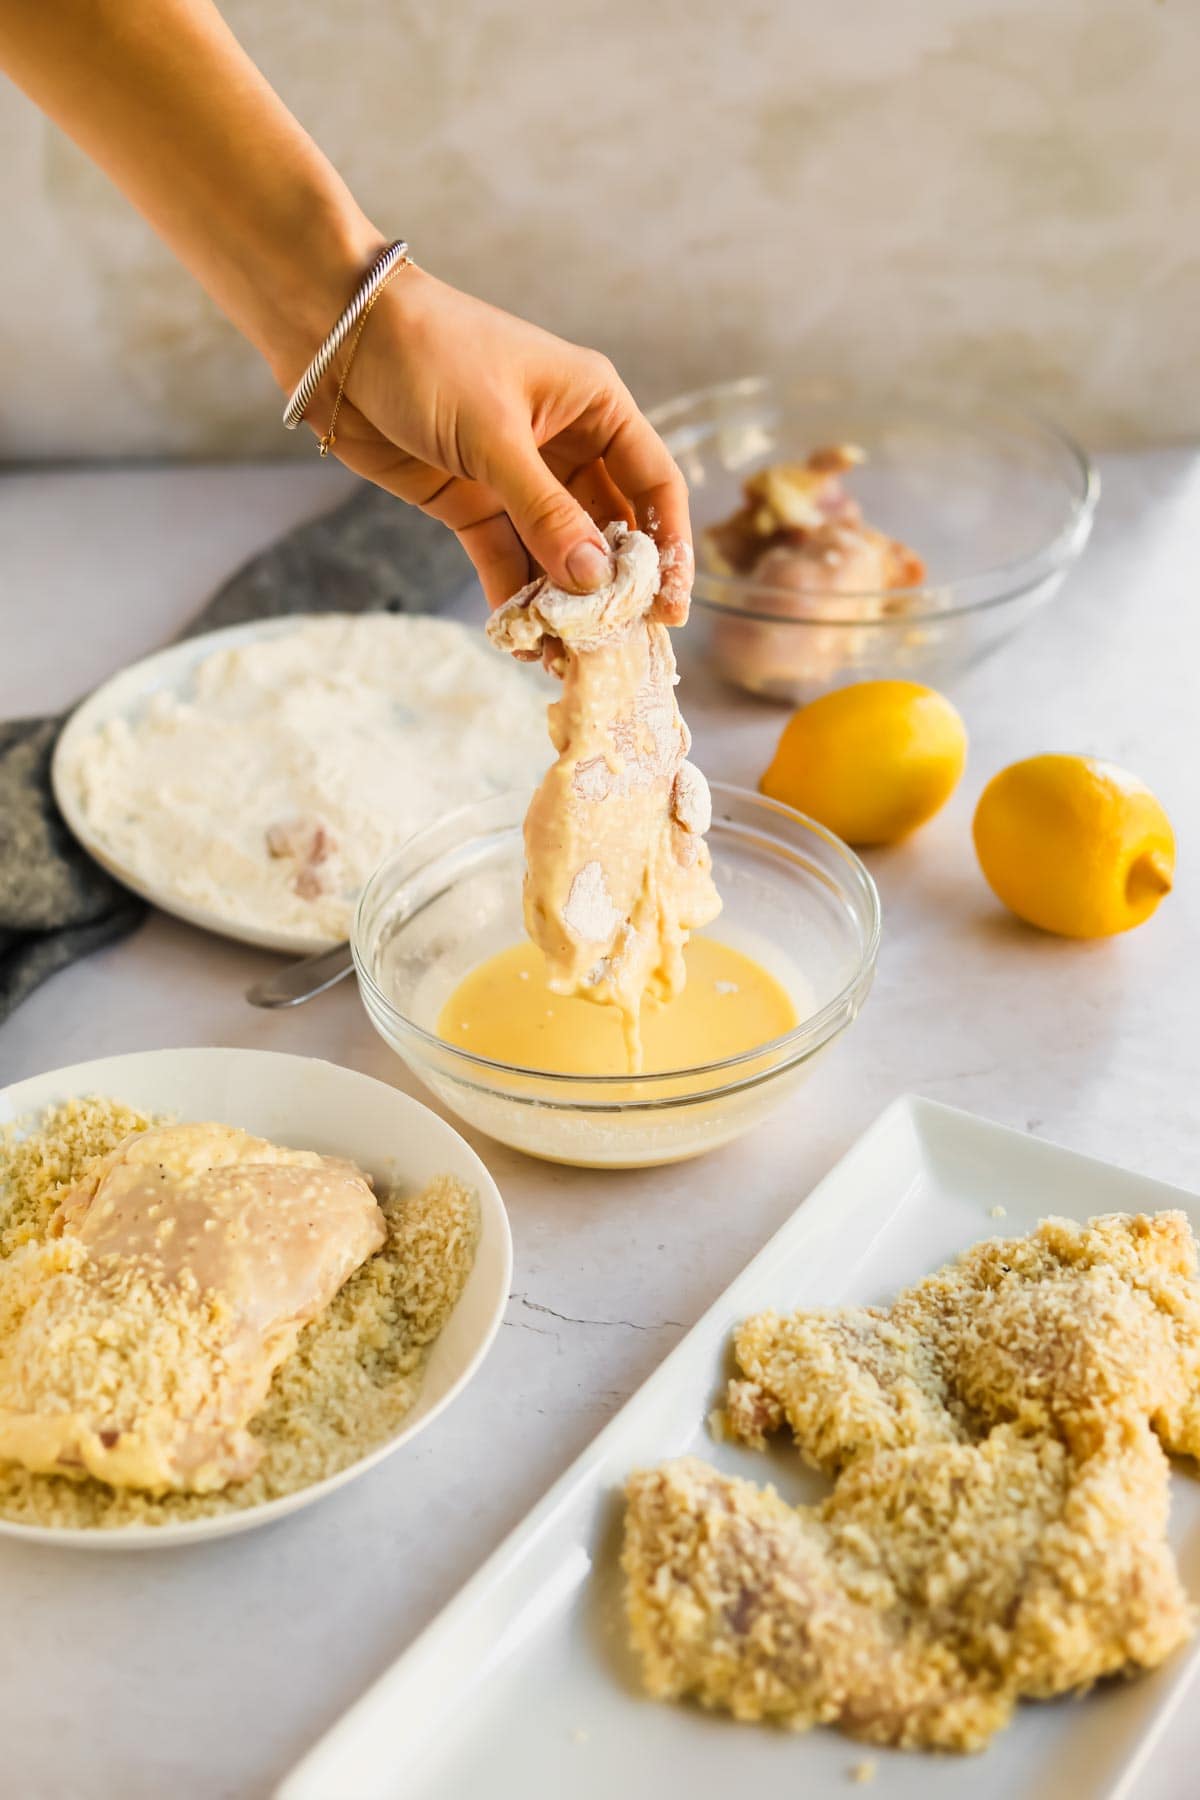 Raw chicken being dipped into egg mixture with lemons, flour, and panko